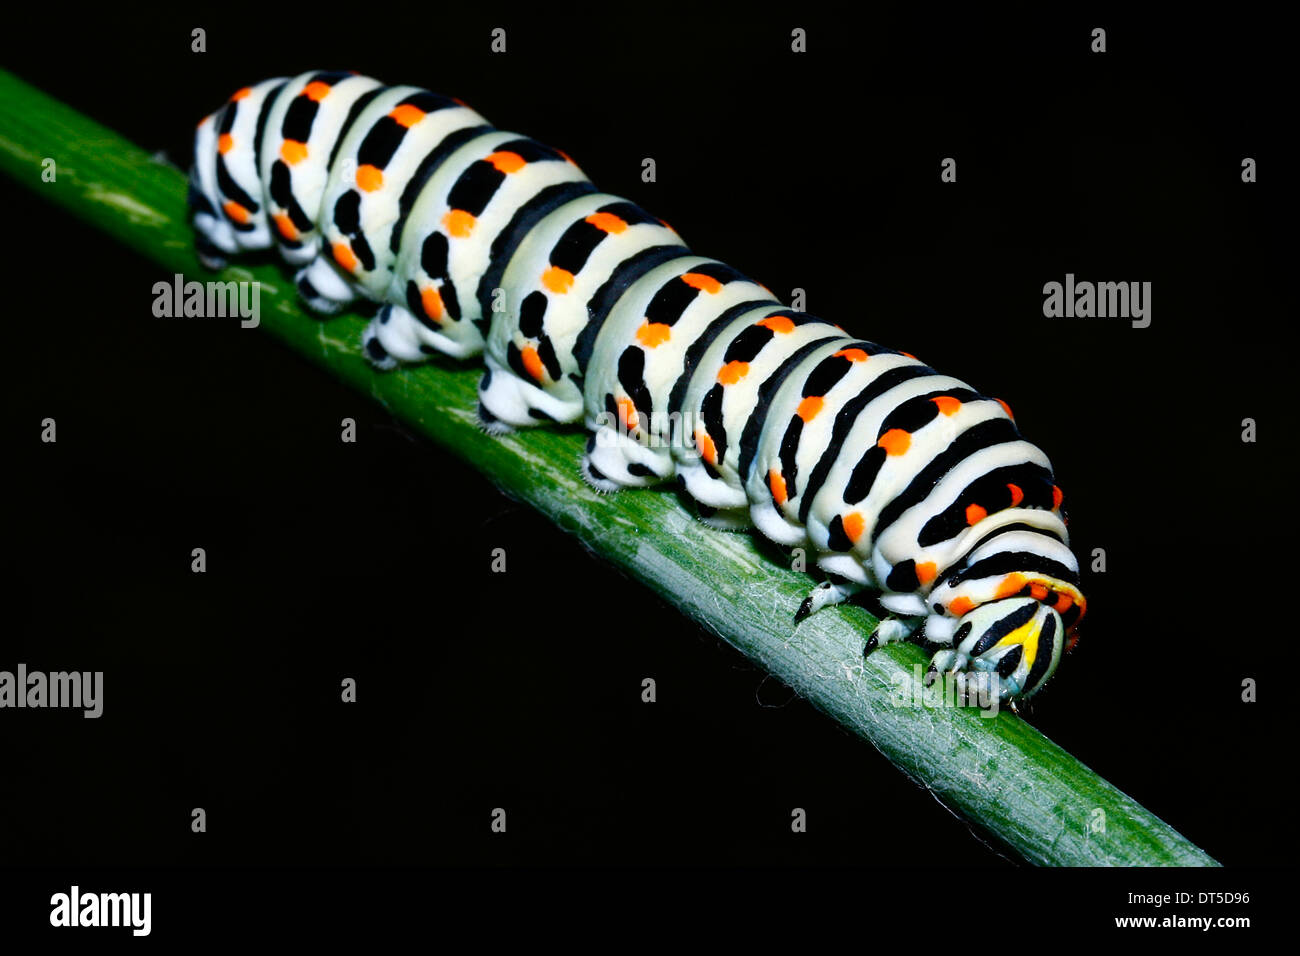 This spring beautiful caterpillar becomes a butterfly impressive Stock Photo